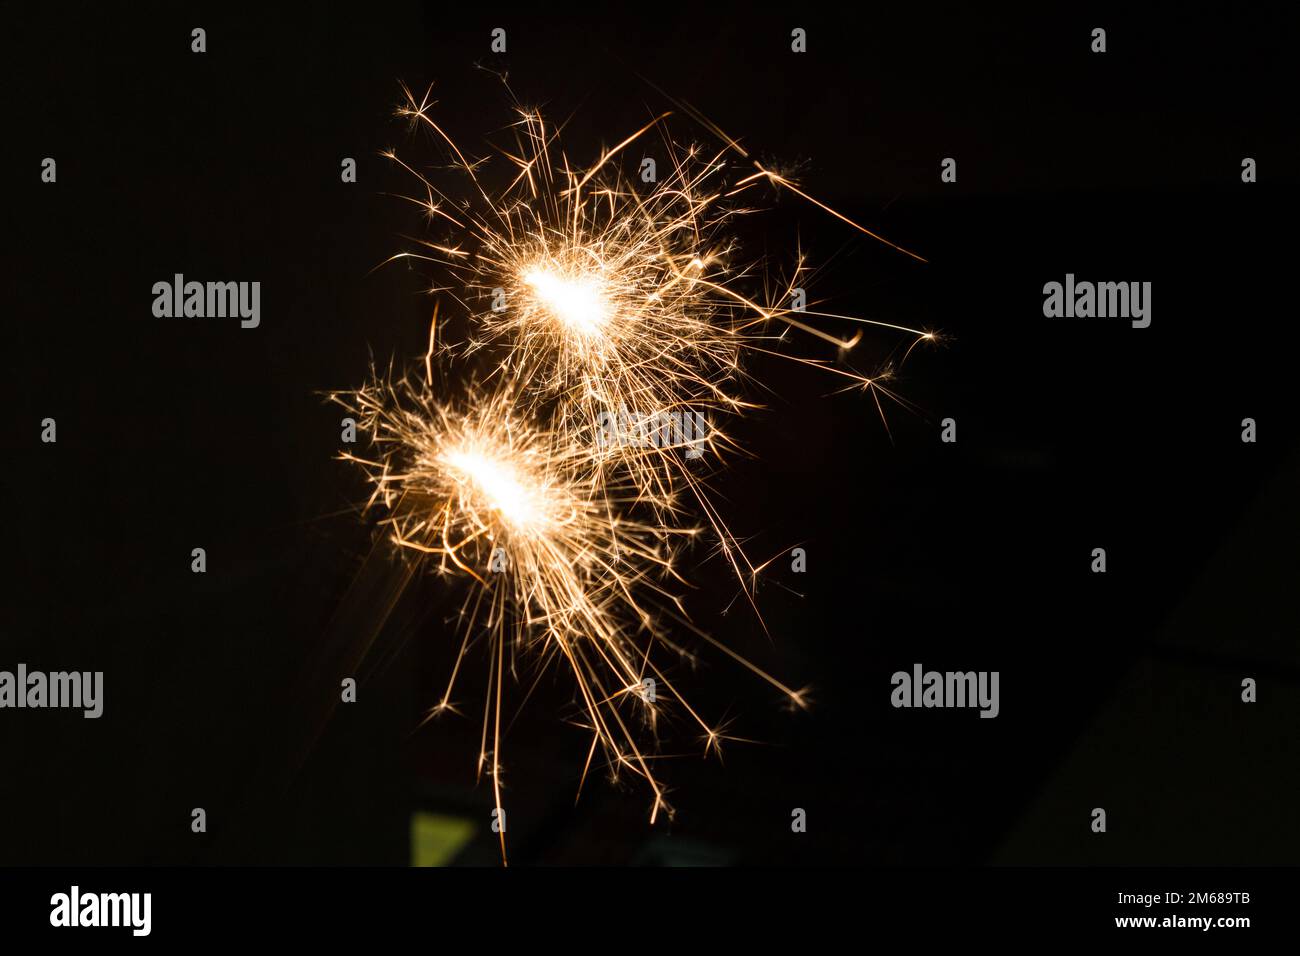 Sparkler at night at New Year's Eve Stock Photo